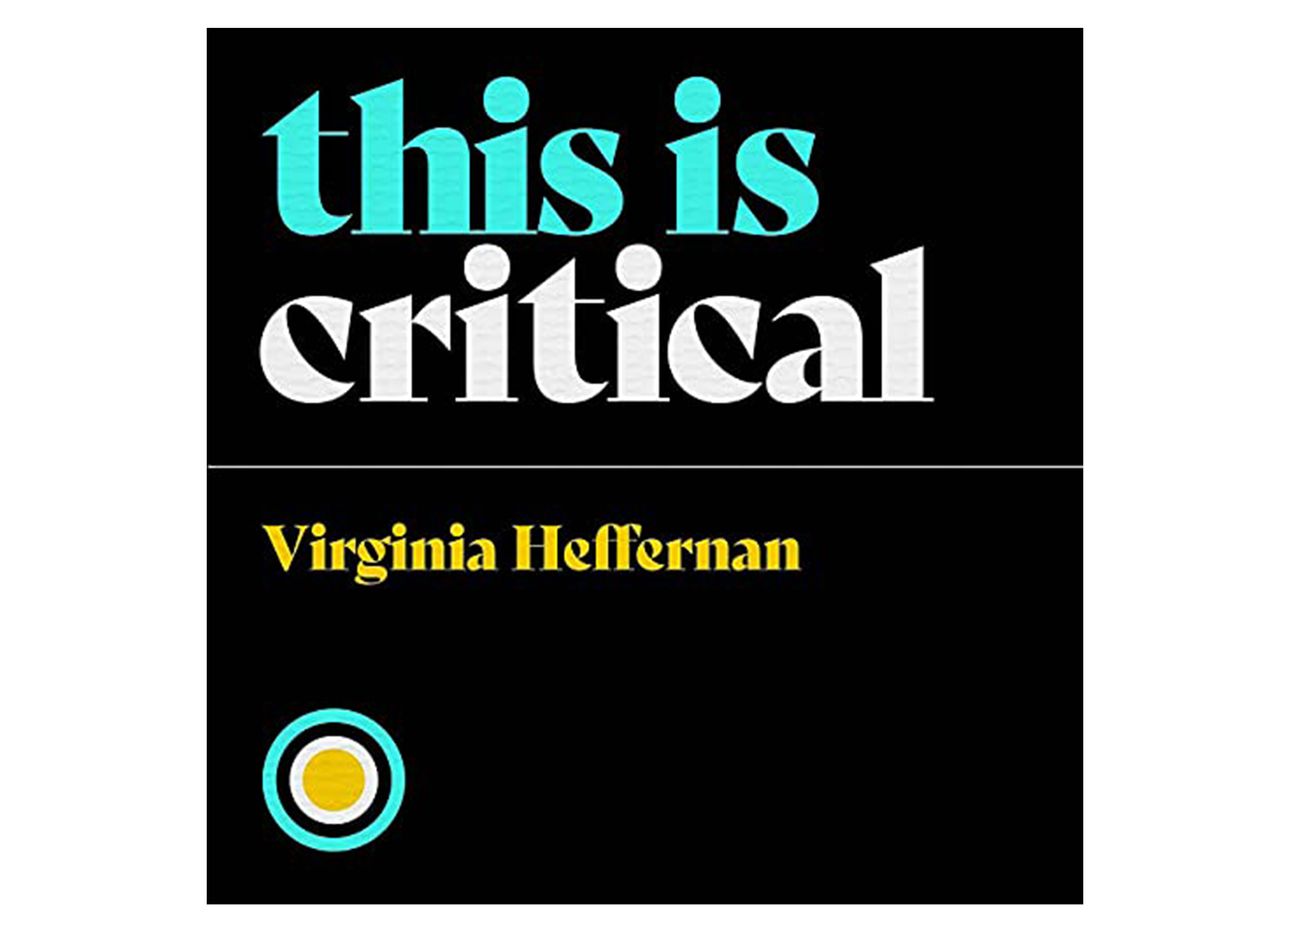 Cover art of This Is Critical podcast